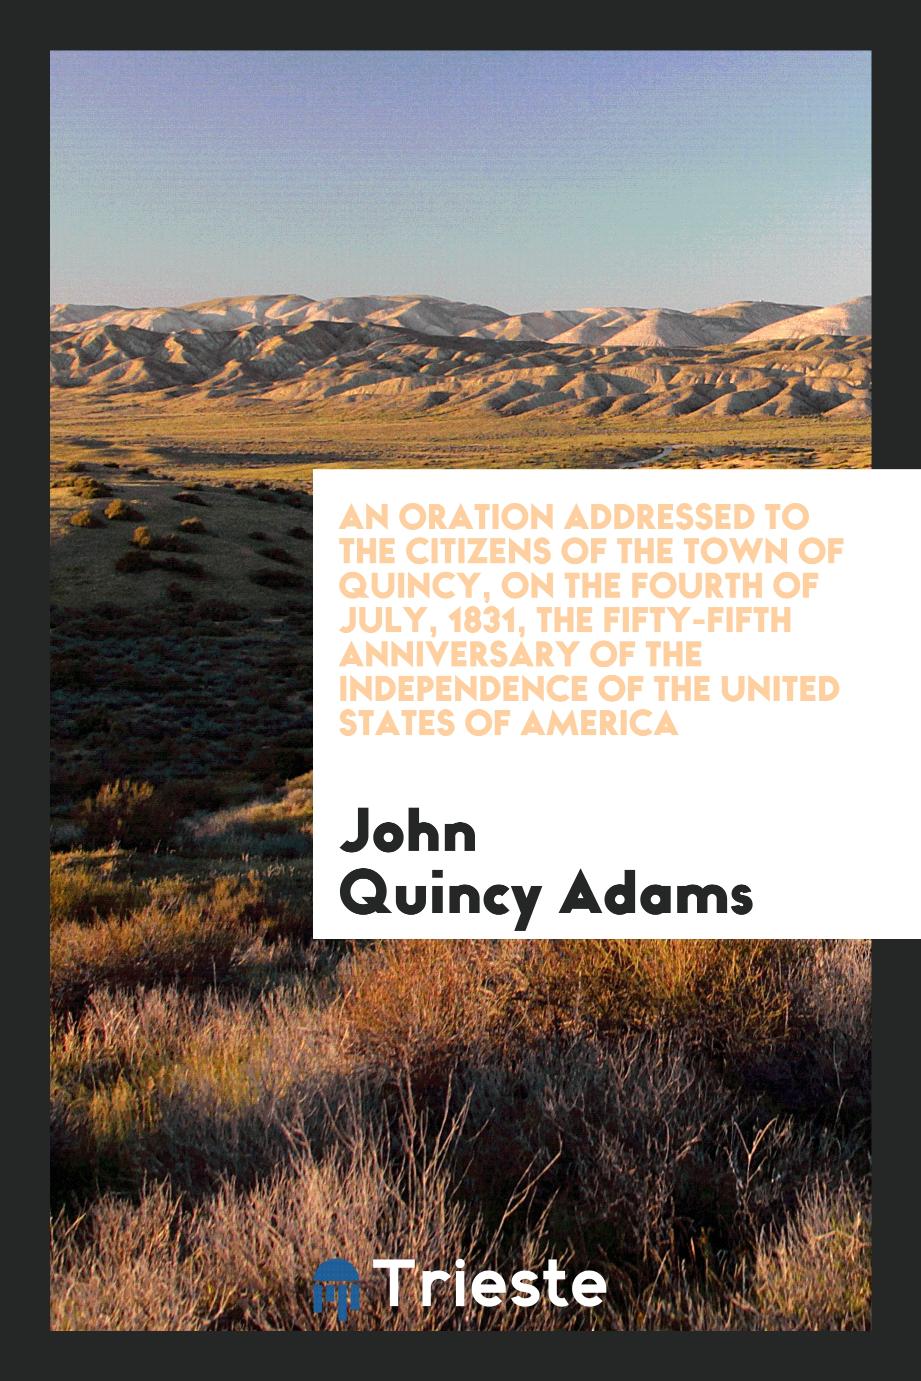 An oration addressed to the citizens of the town of Quincy, on the fourth of July, 1831, the fifty-fifth anniversary of the independence of the United States of America